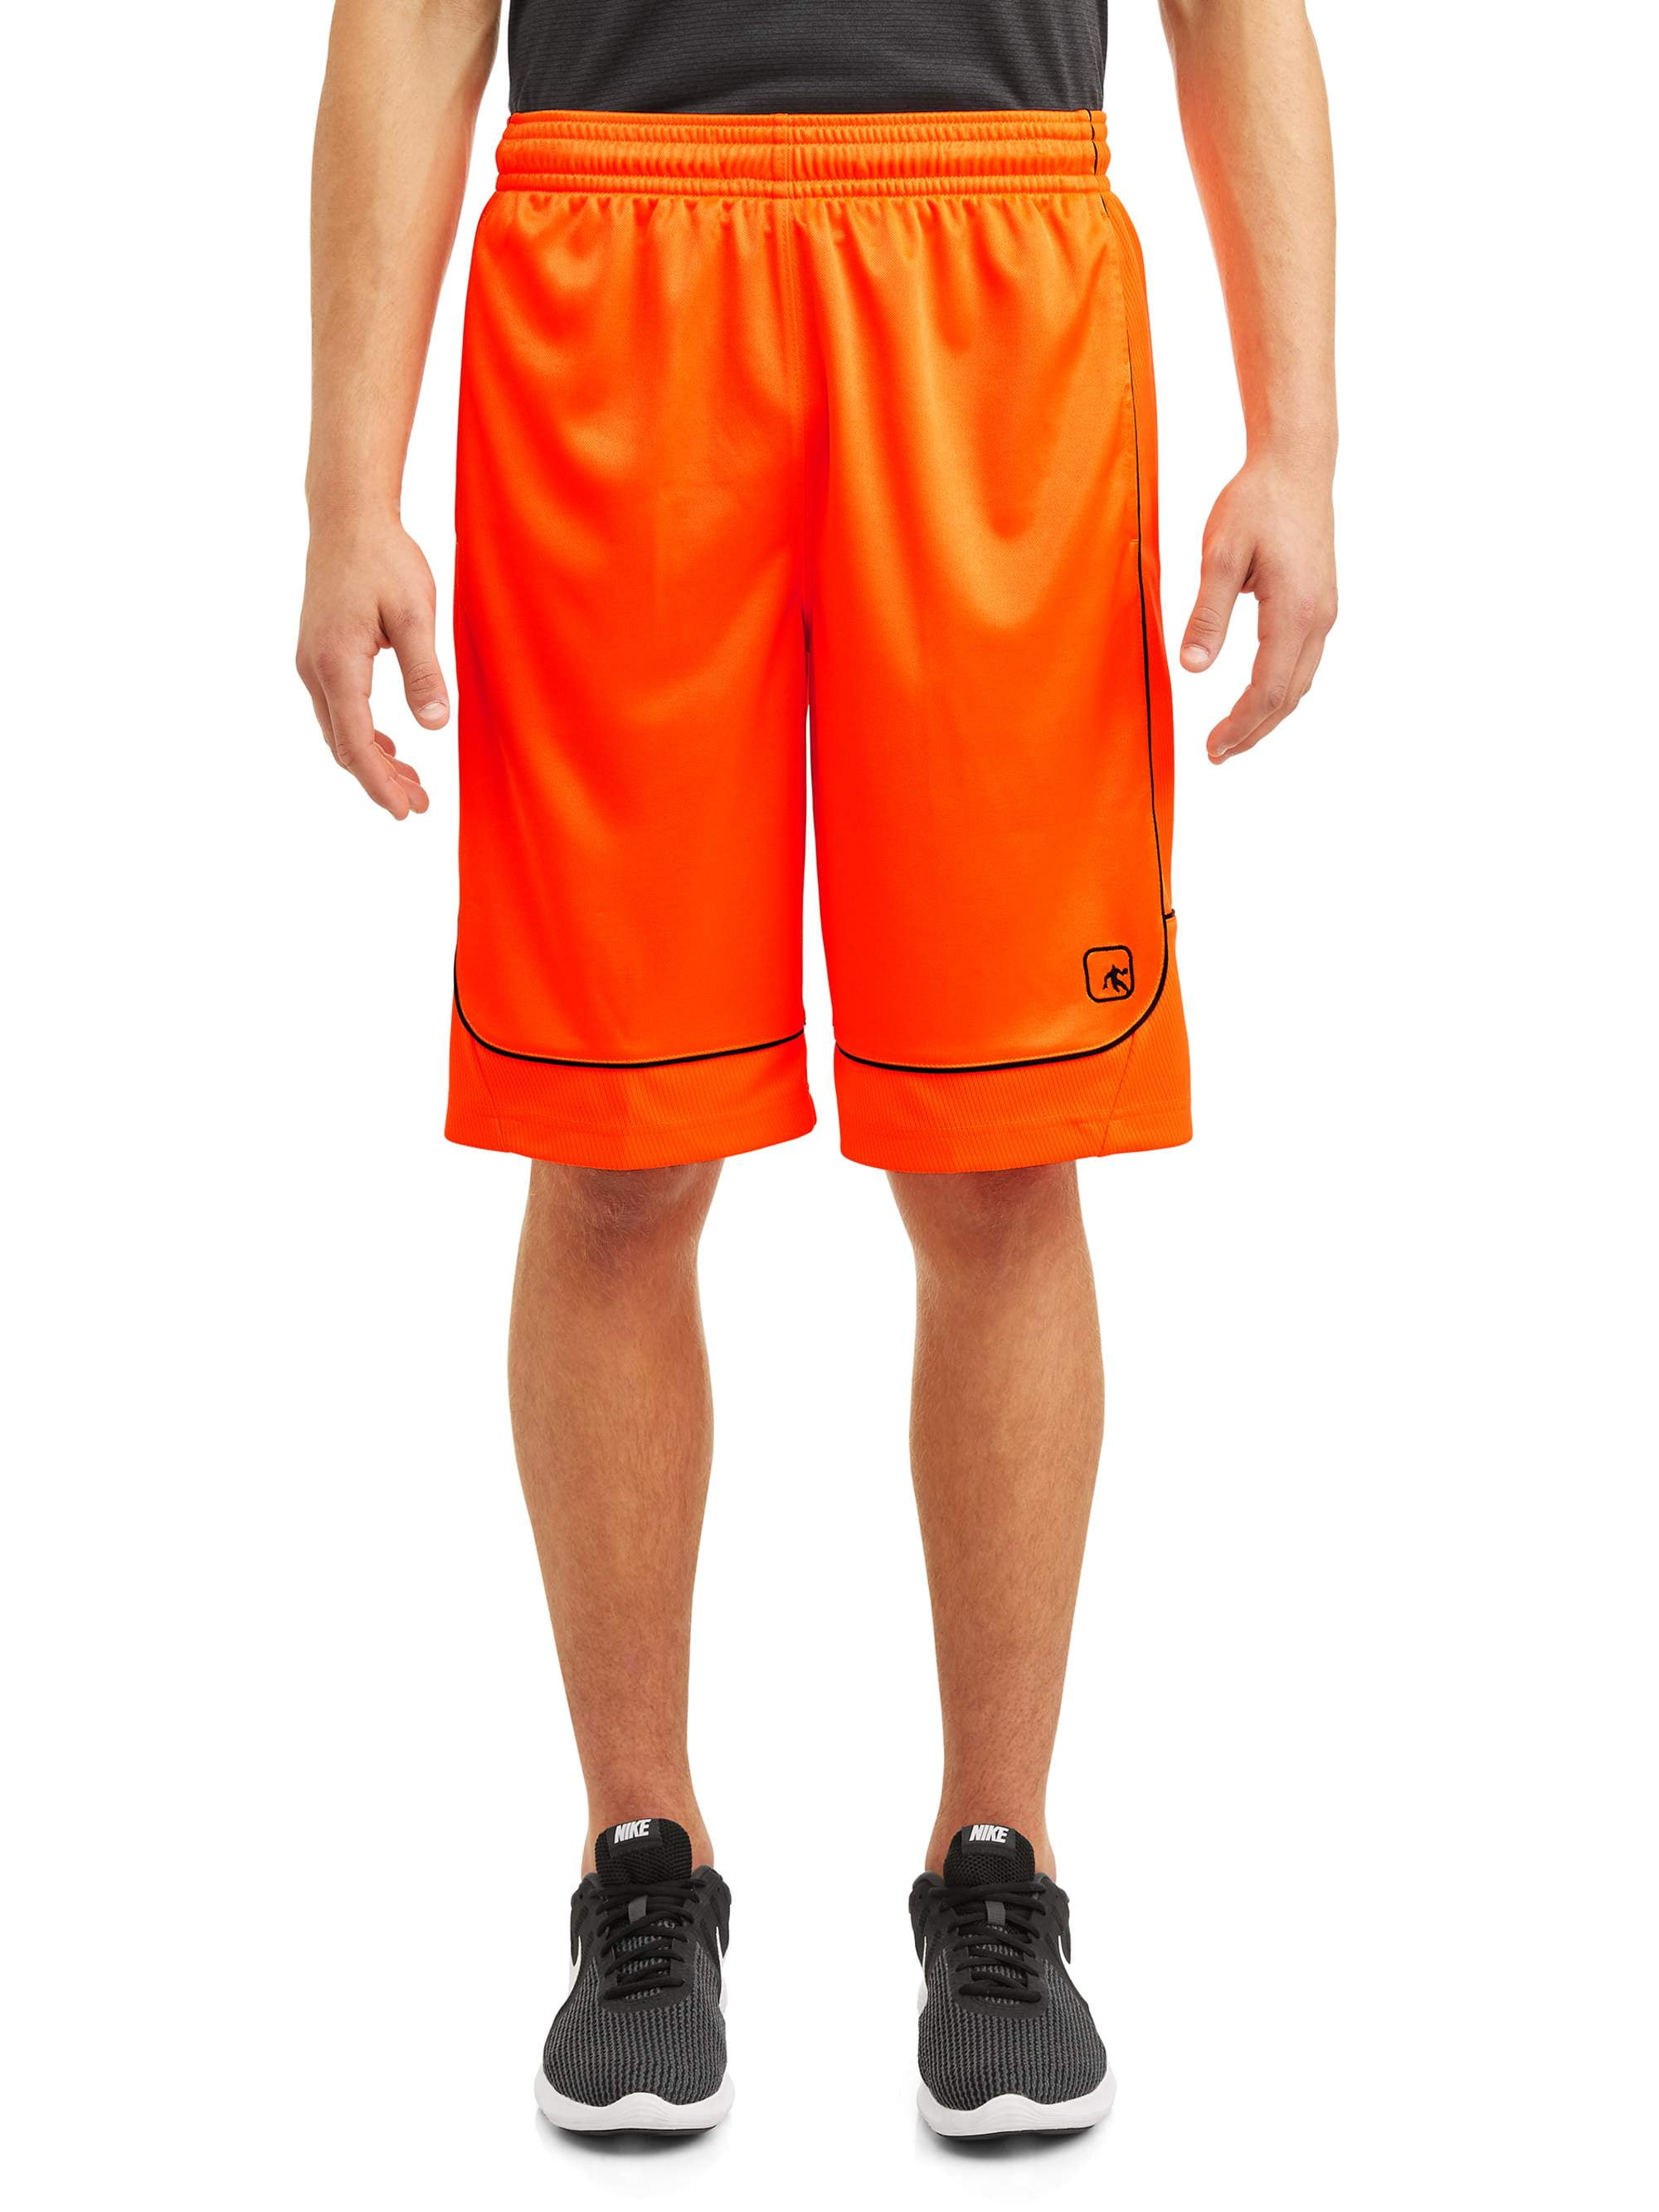 AND1 Mens All Courts Basketball Shorts